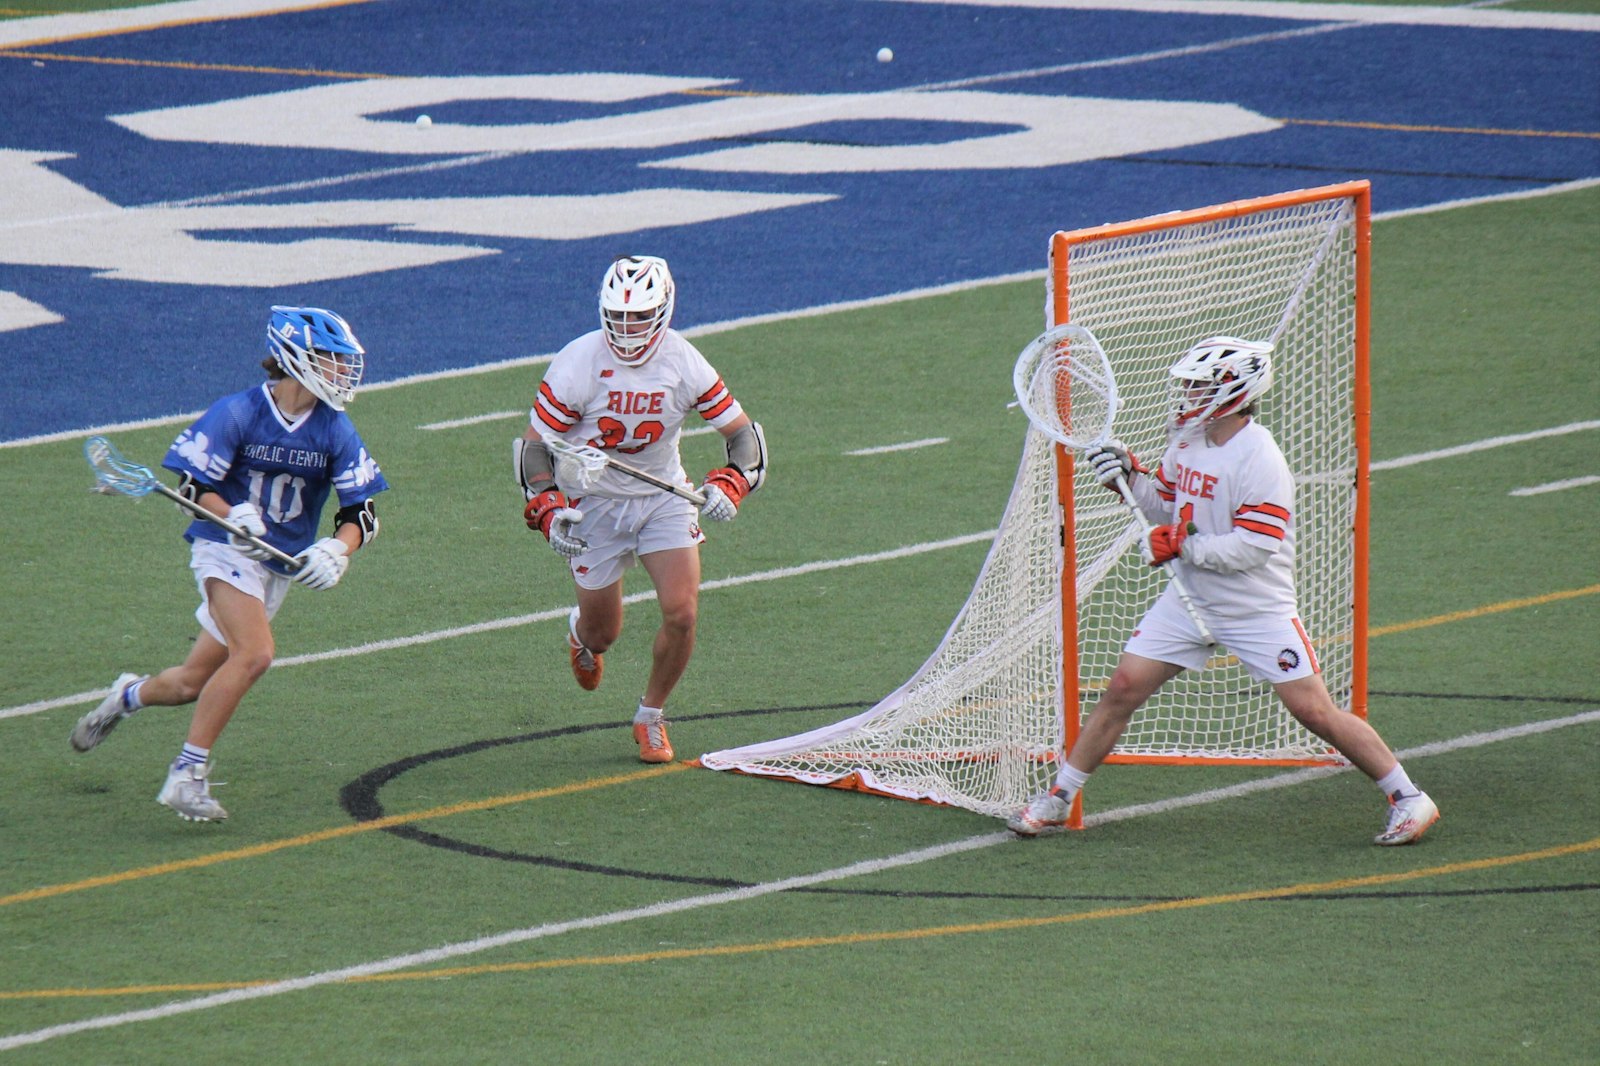 Connor Lukas rushes the Brother Rice goal as Sam Klein defends and Cam Sims stands ready in the crease during fourth-quarter action.